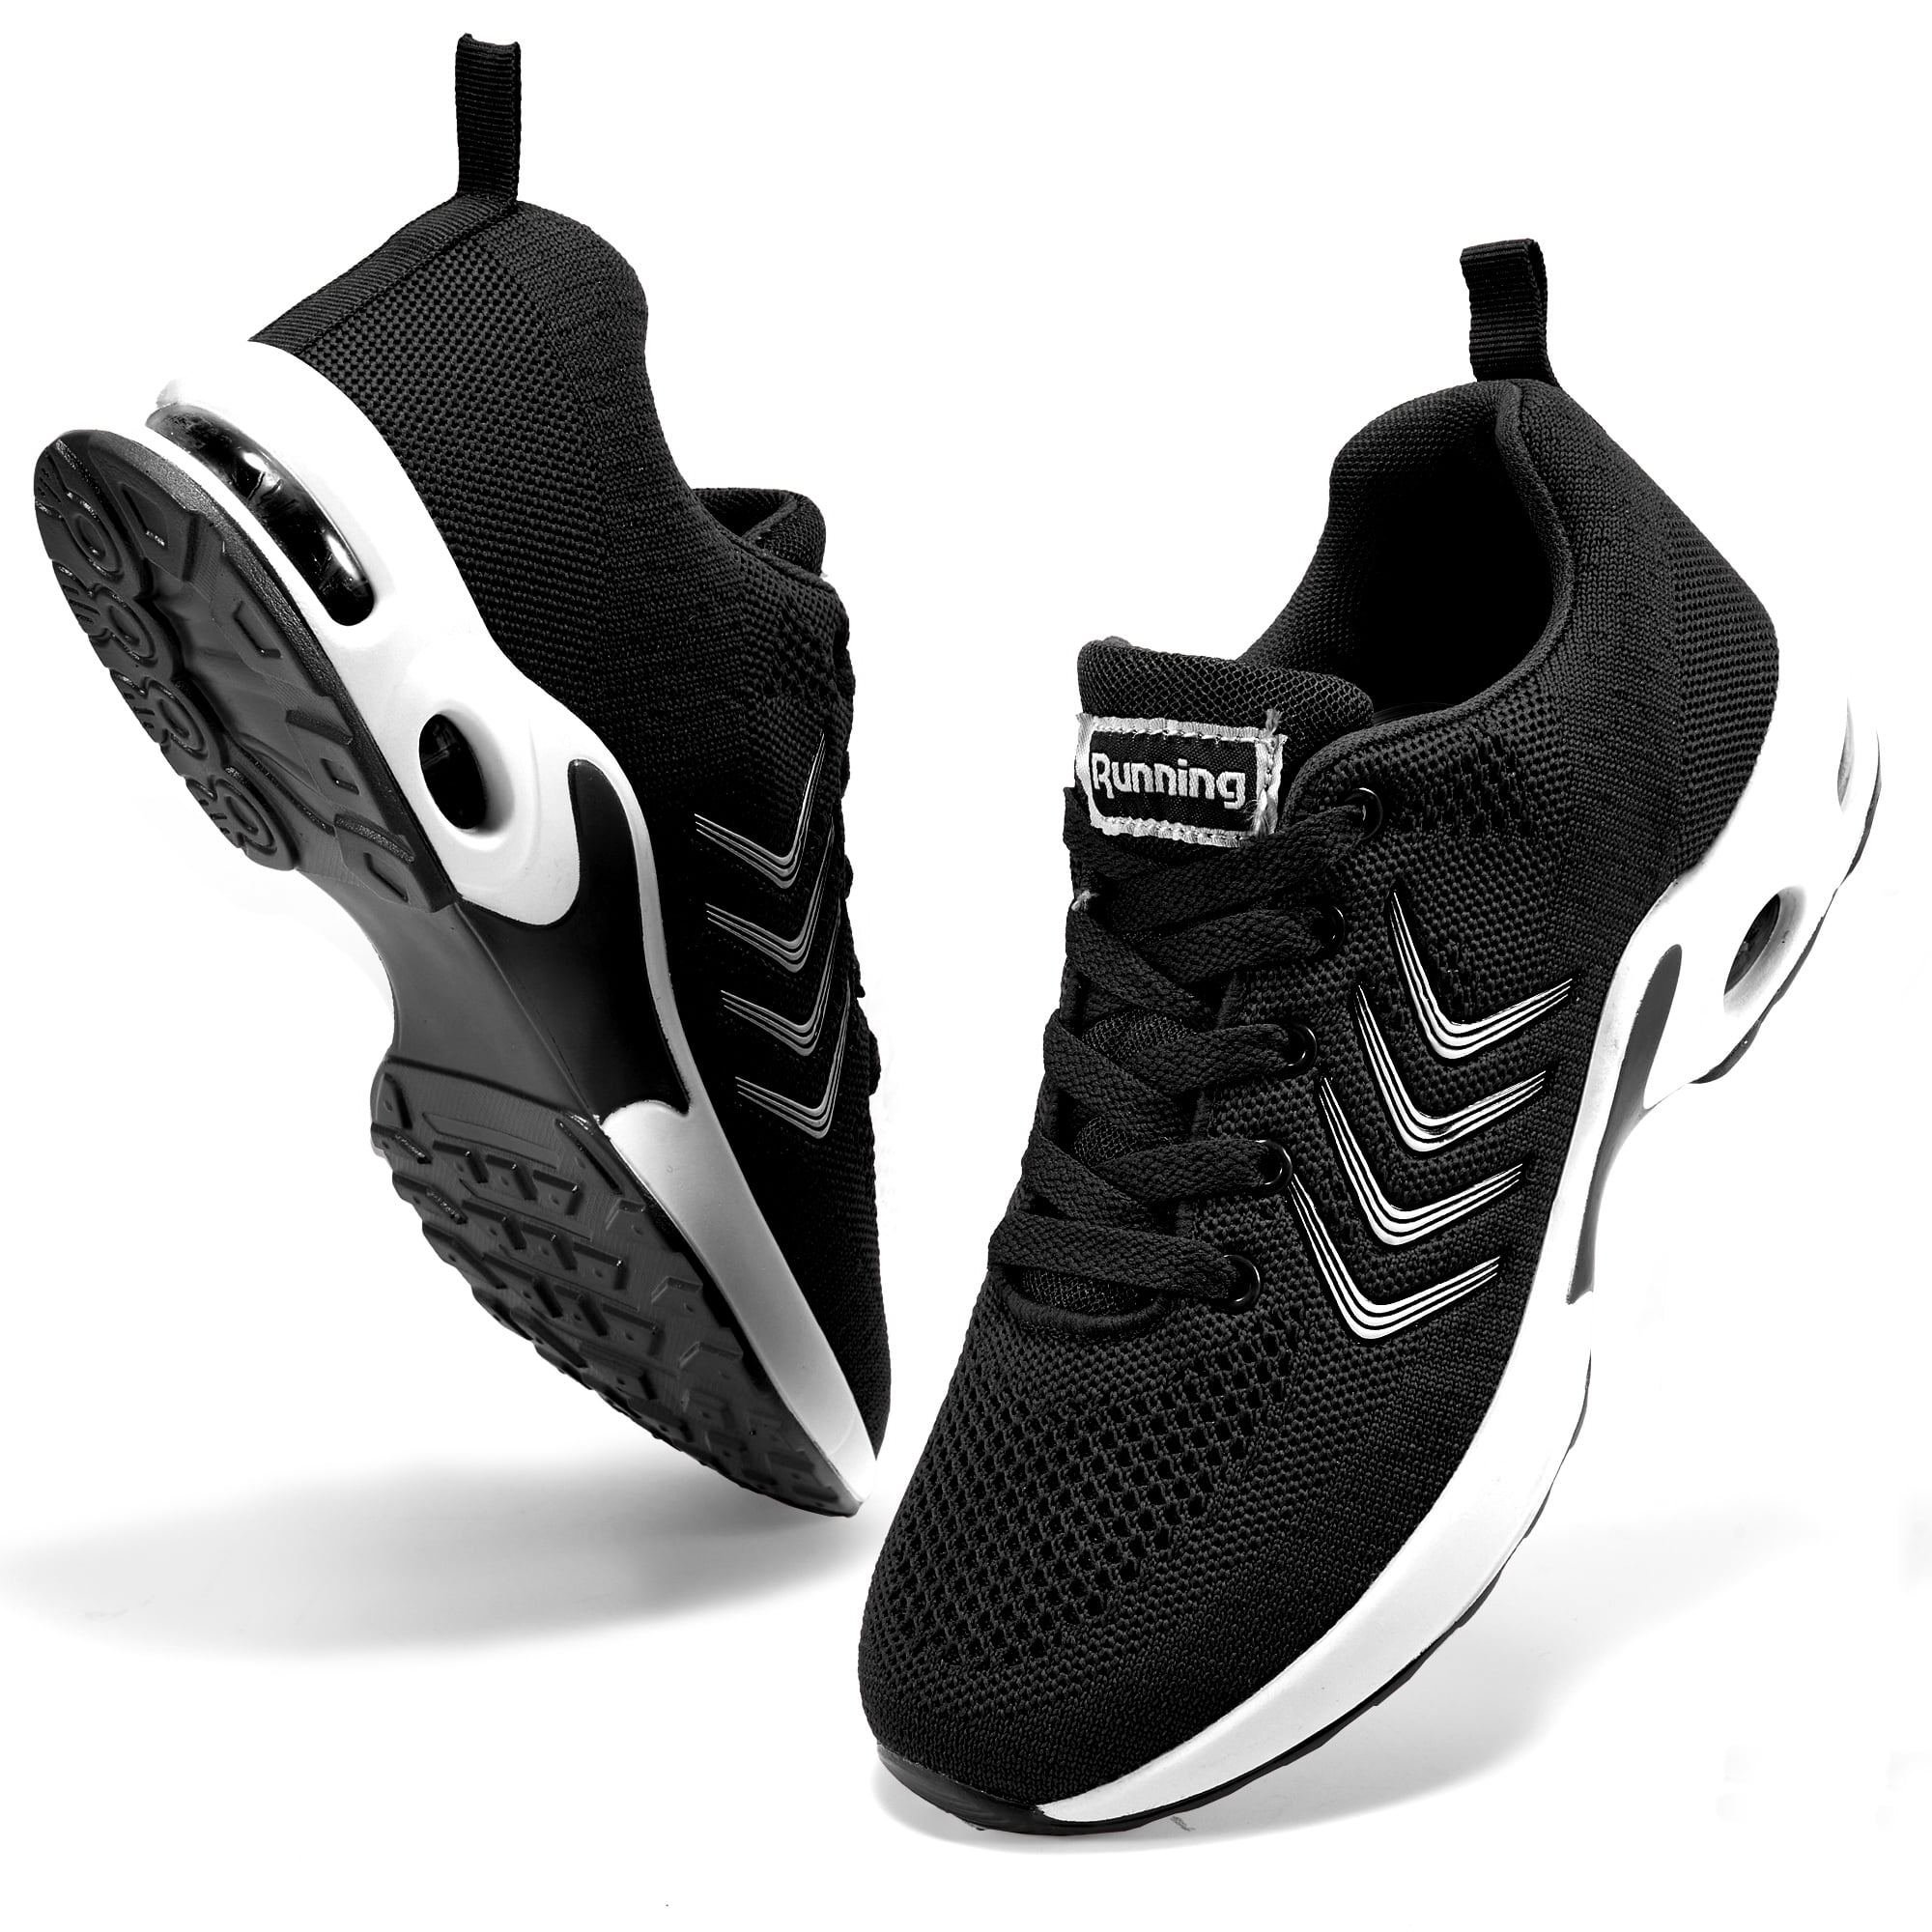 Comfy Sneakers for Men の Lite Tech Running Shoes Lightweight Casual White Black Trainers 2019 Fall-Winter 